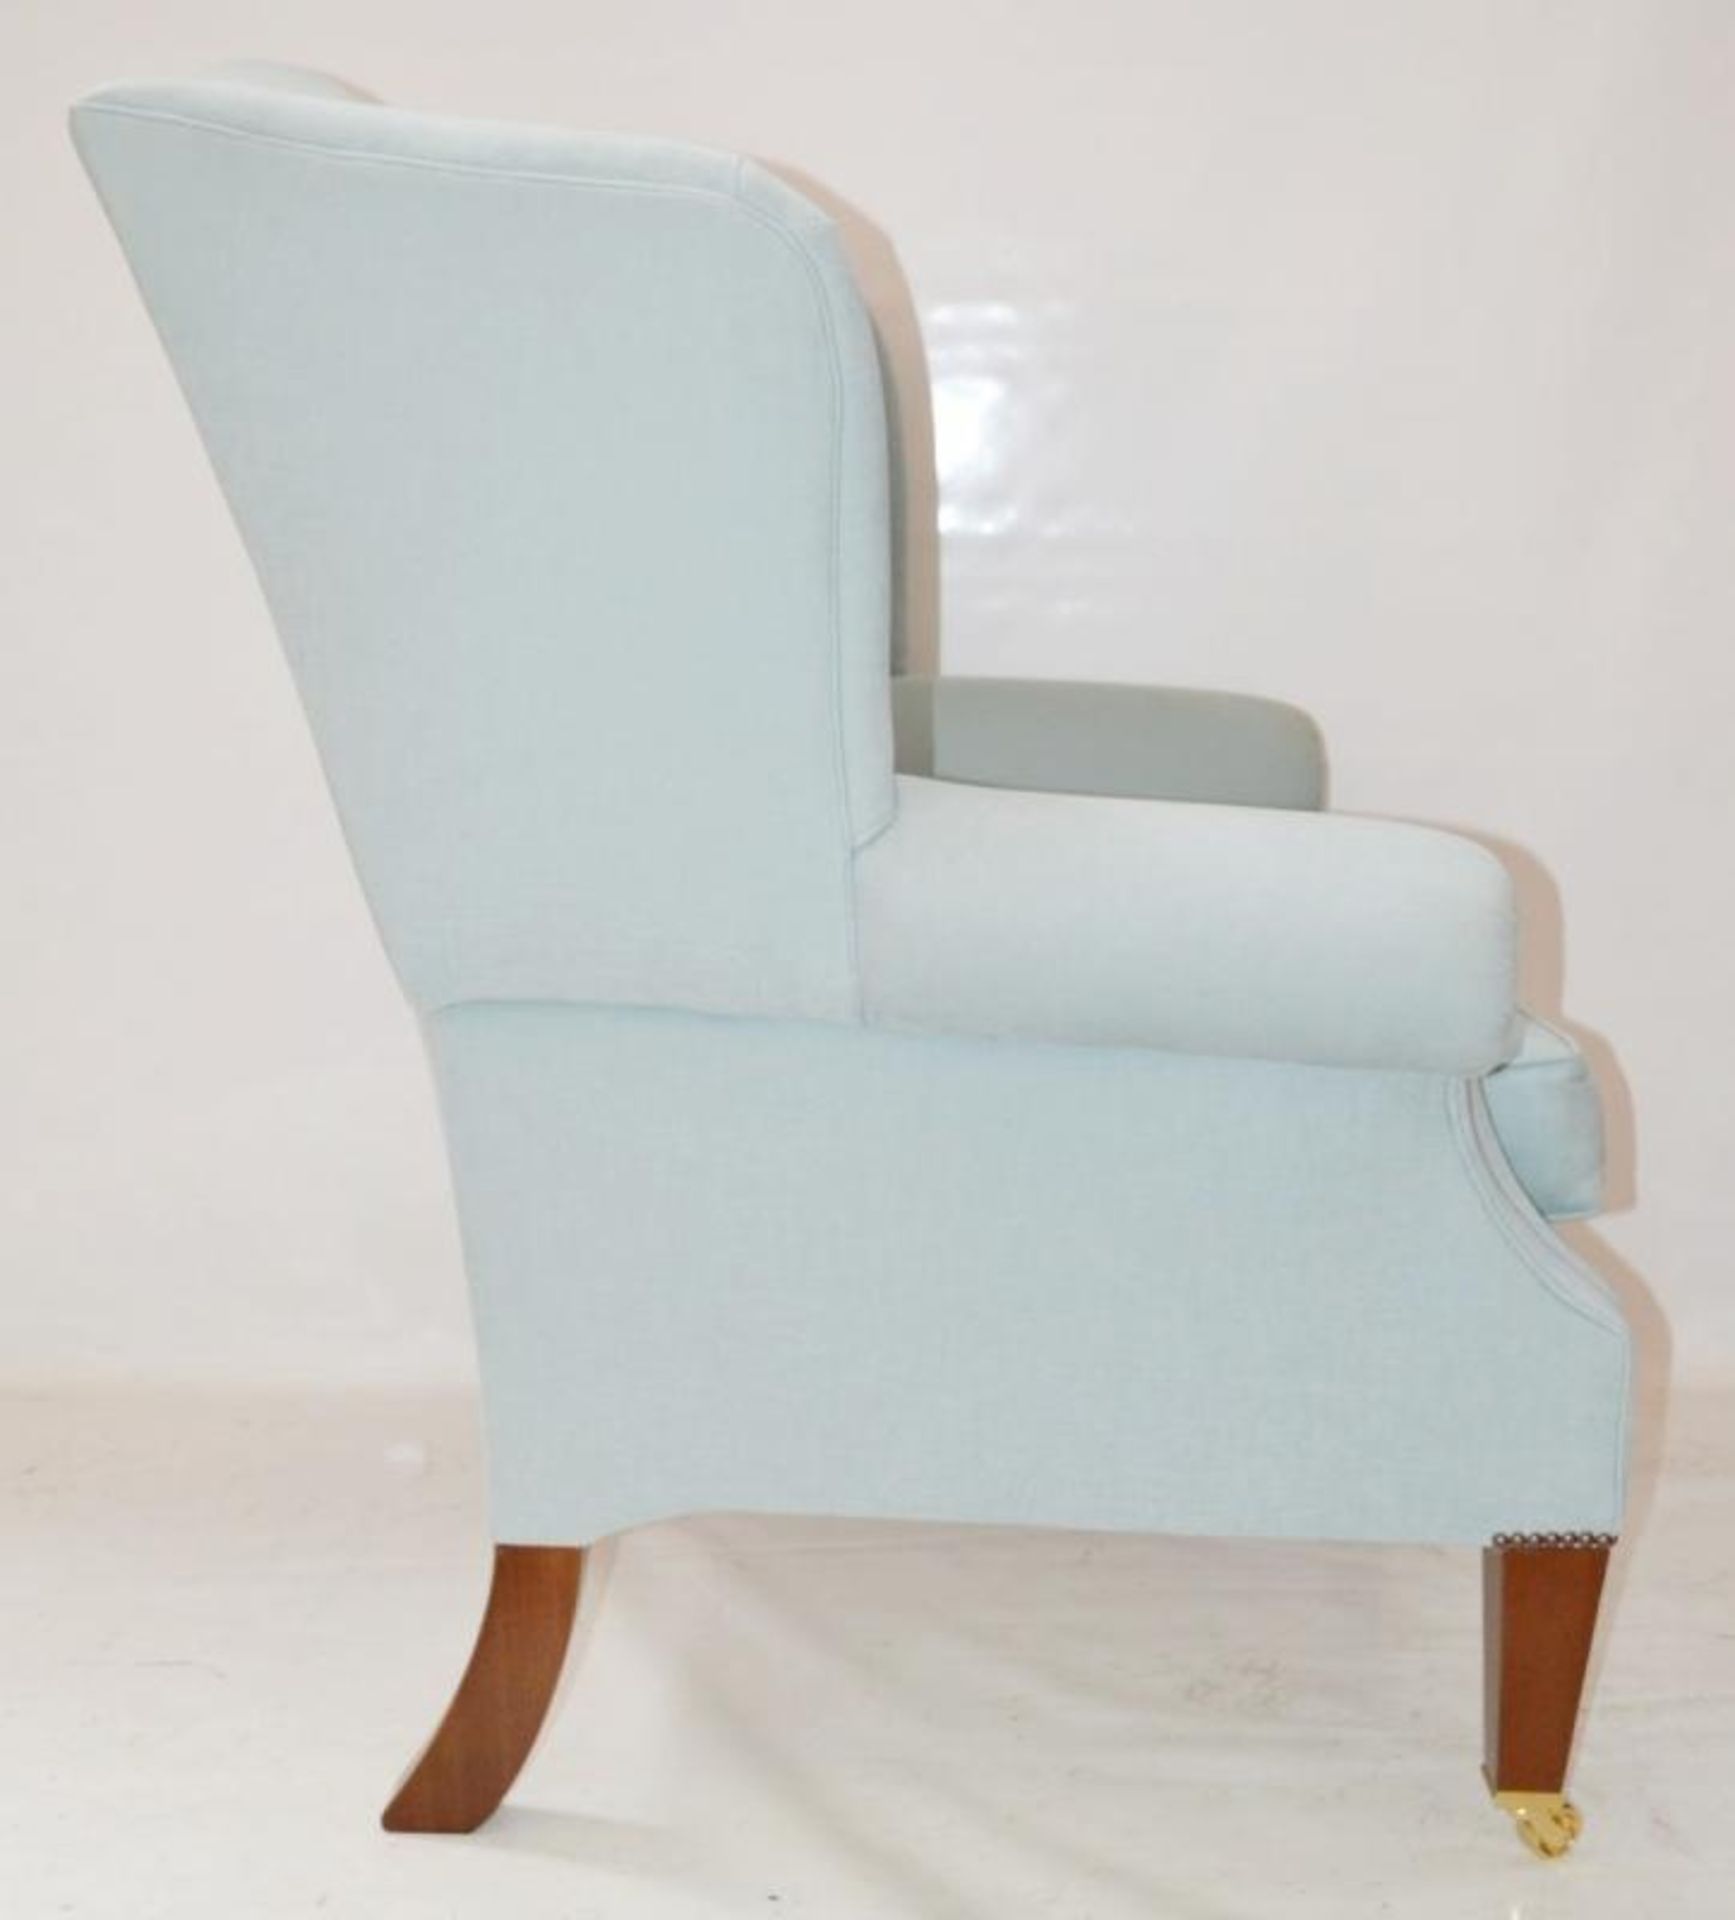 1 x Duresta "Somerset" Wing Chair Light Blue - Dimensions: 113H x 91W x 92D cms - Ref: 3143184-A NP1 - Image 4 of 7